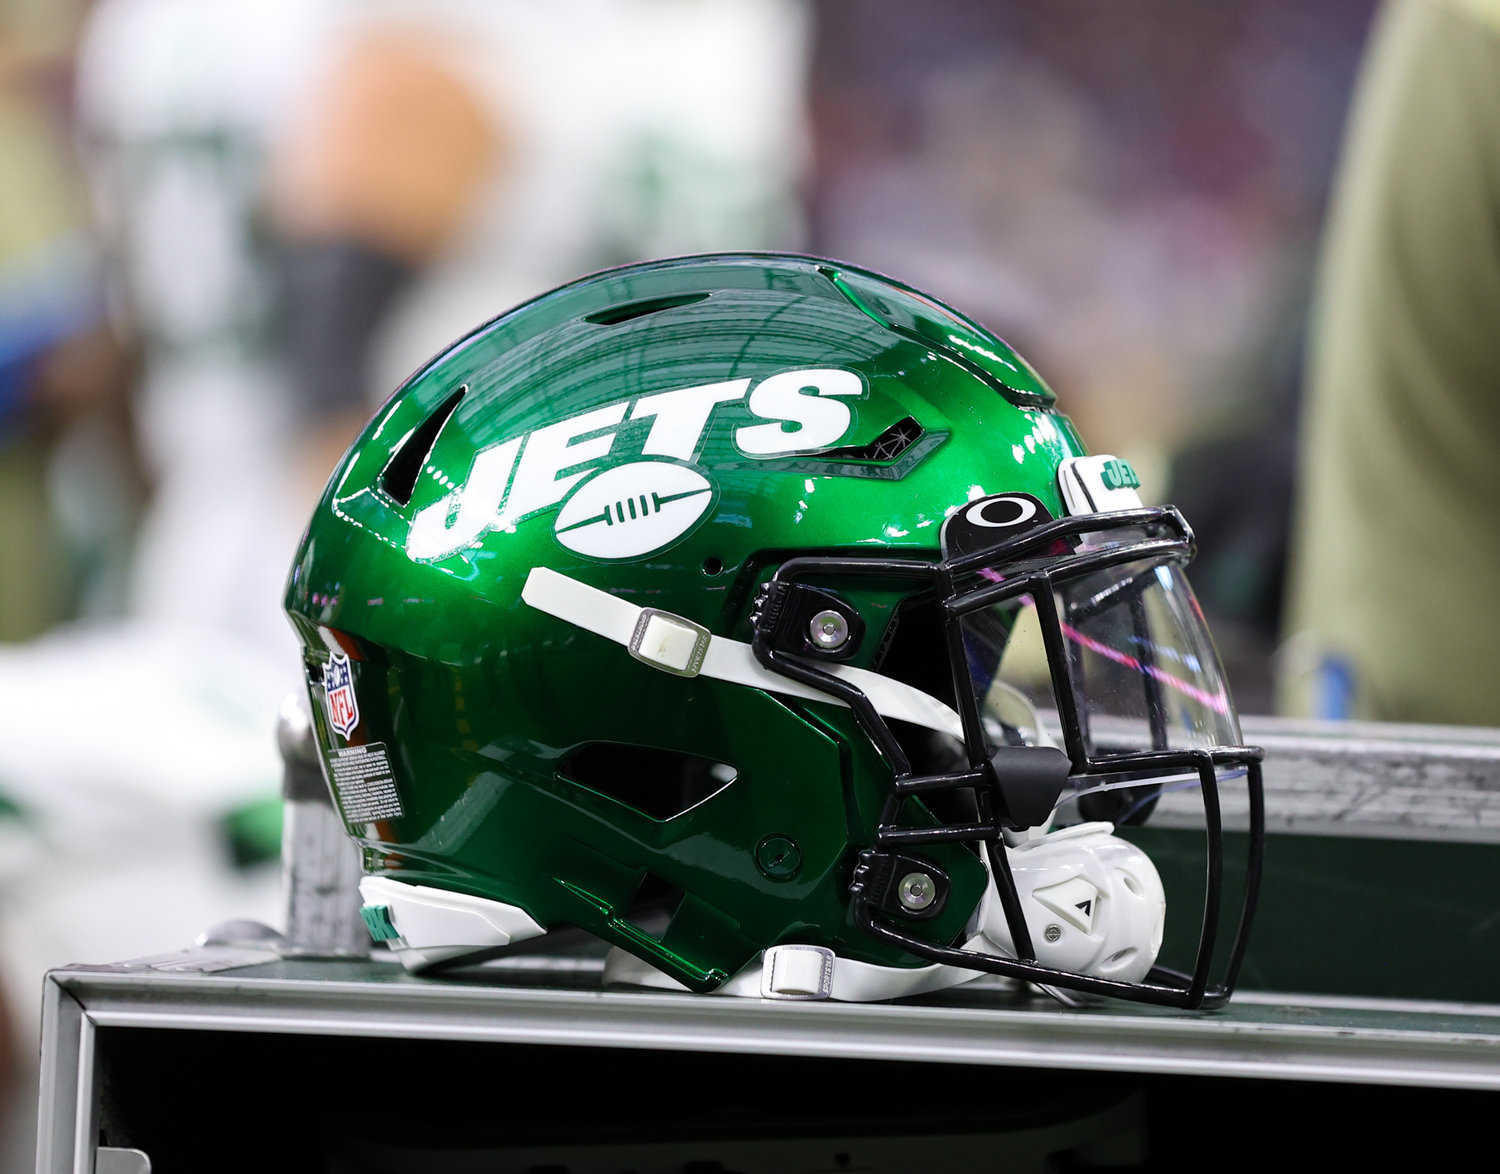 A New York Jets helmet during an NFL game between the Houston Texans and the New York Jets on November 28, 2021 in Houston, Texas. The Jets won, 21-14